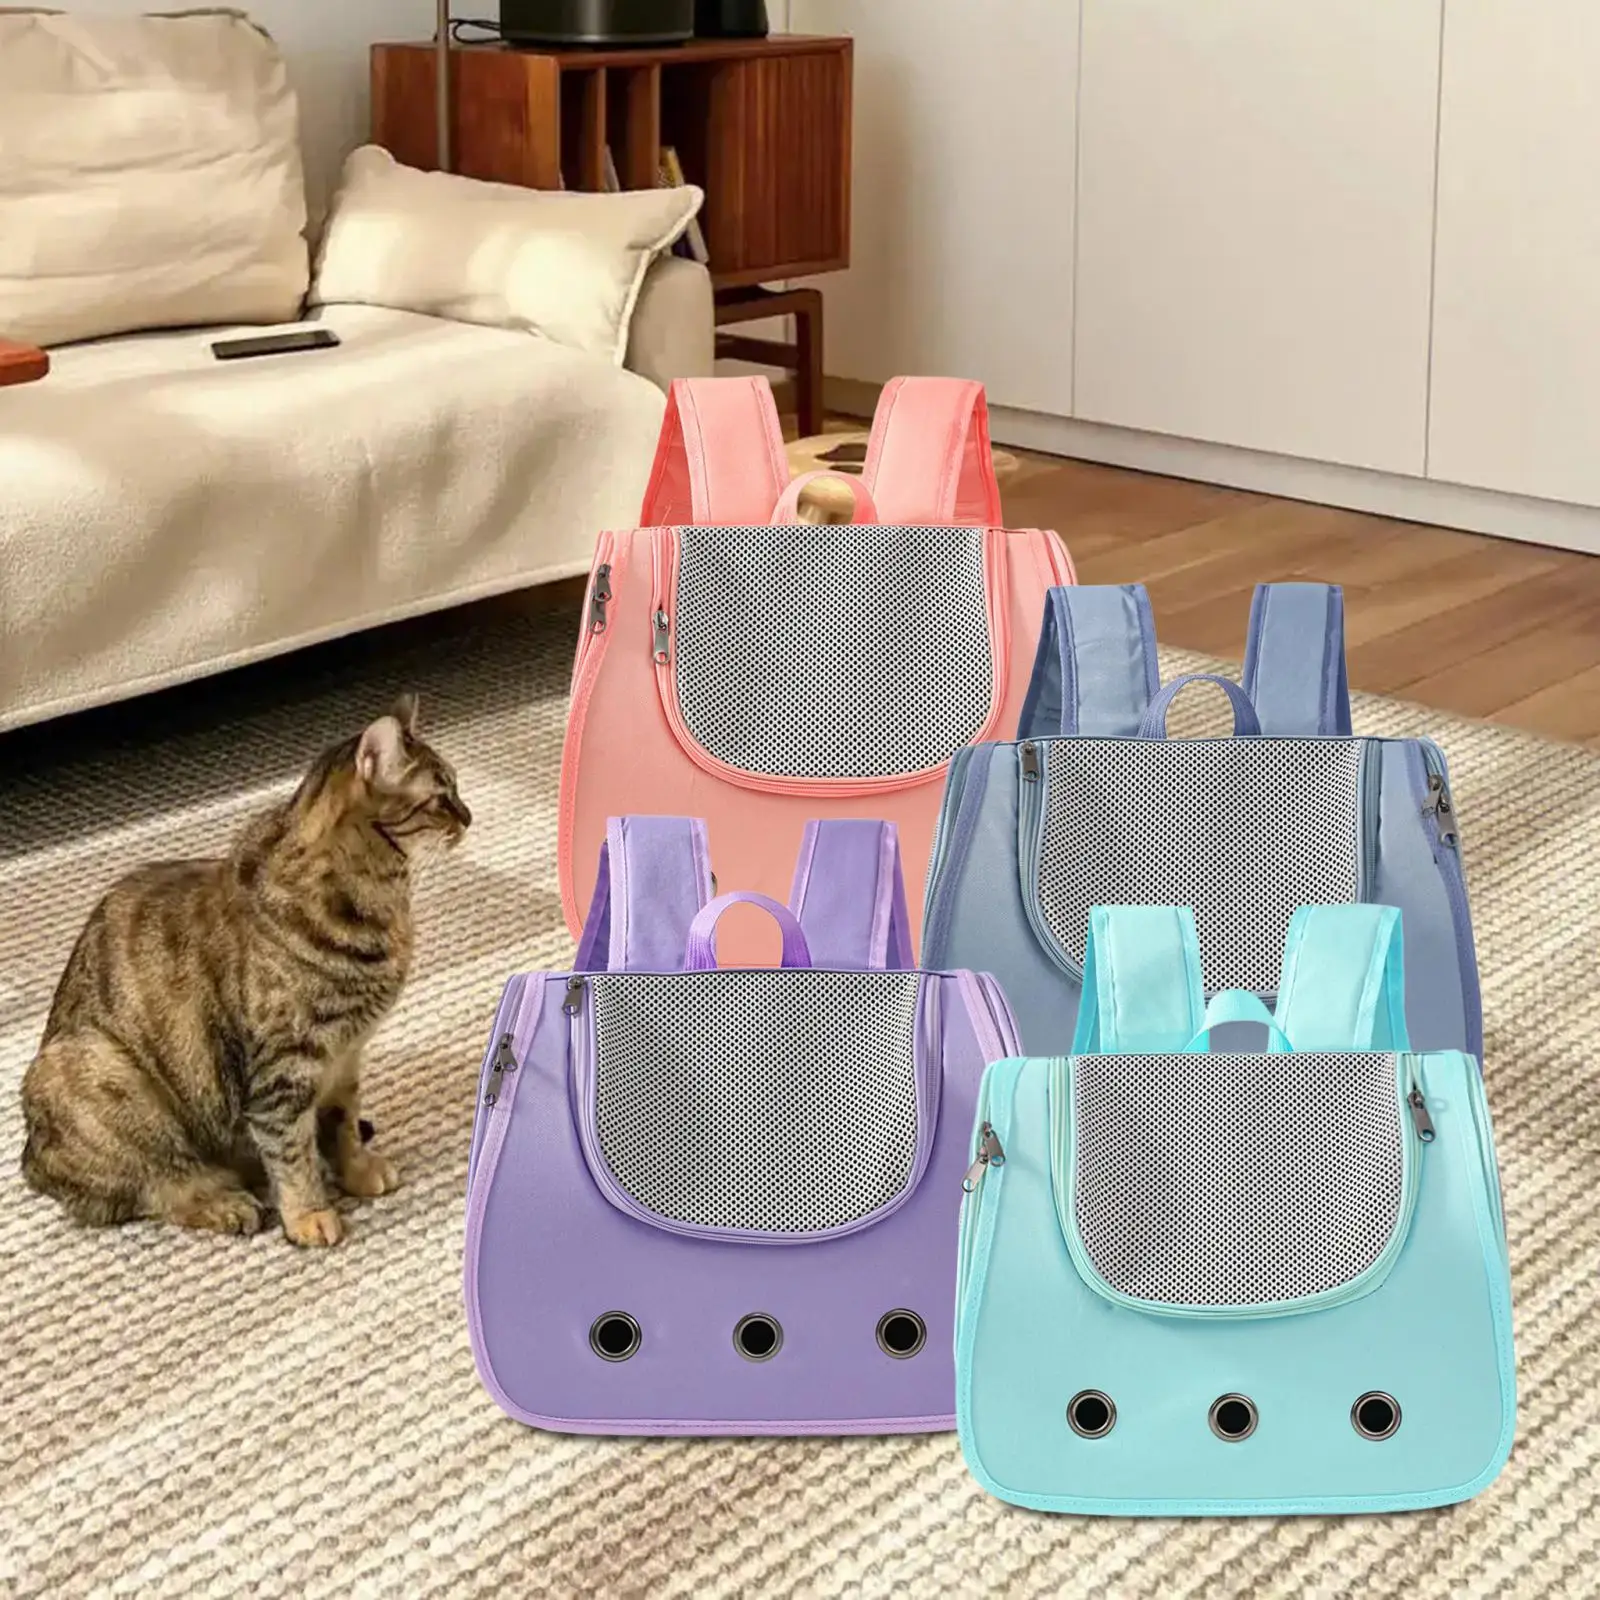 Pet Cat Carrier Backpack Ventilated Breathable Mesh Carrying Bag Cat Dog Backpack Bag for Camping Walking Traveling Outdoor Use